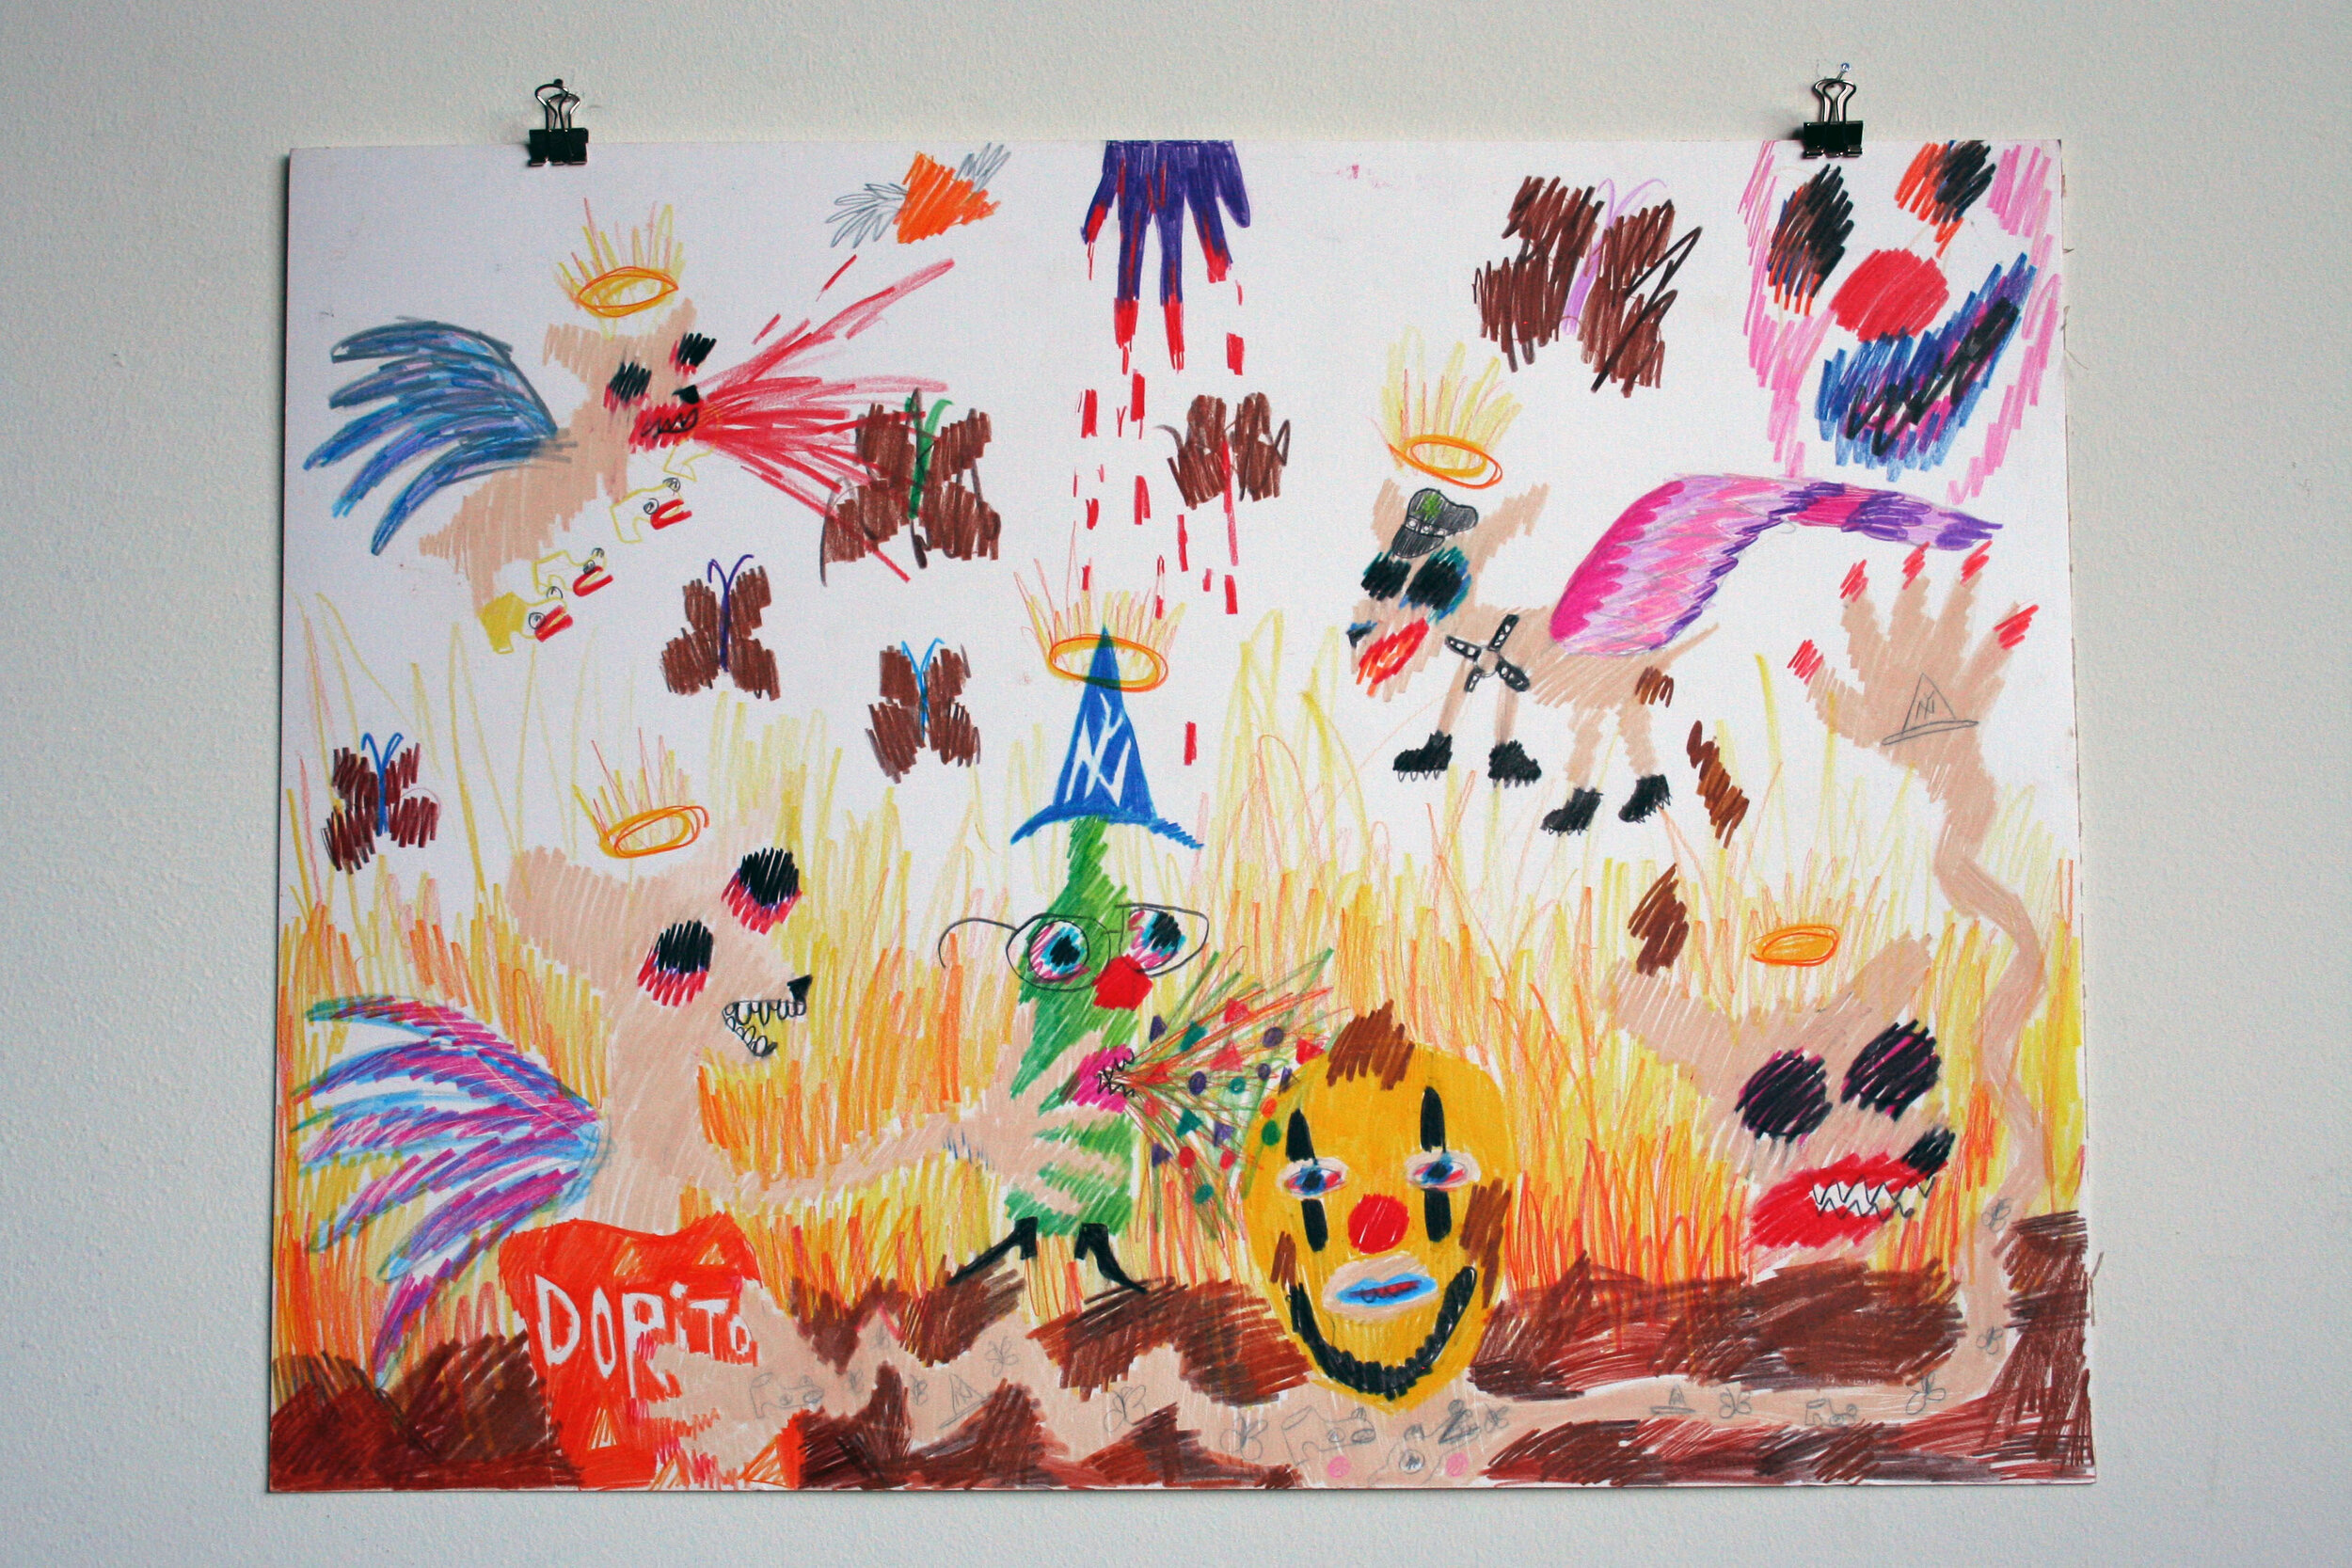   Rule in Hell or Serve in Heaven,  2013  18 x 24 inches (45.72 x 60.96 cm.)  Colored pencil on paper 